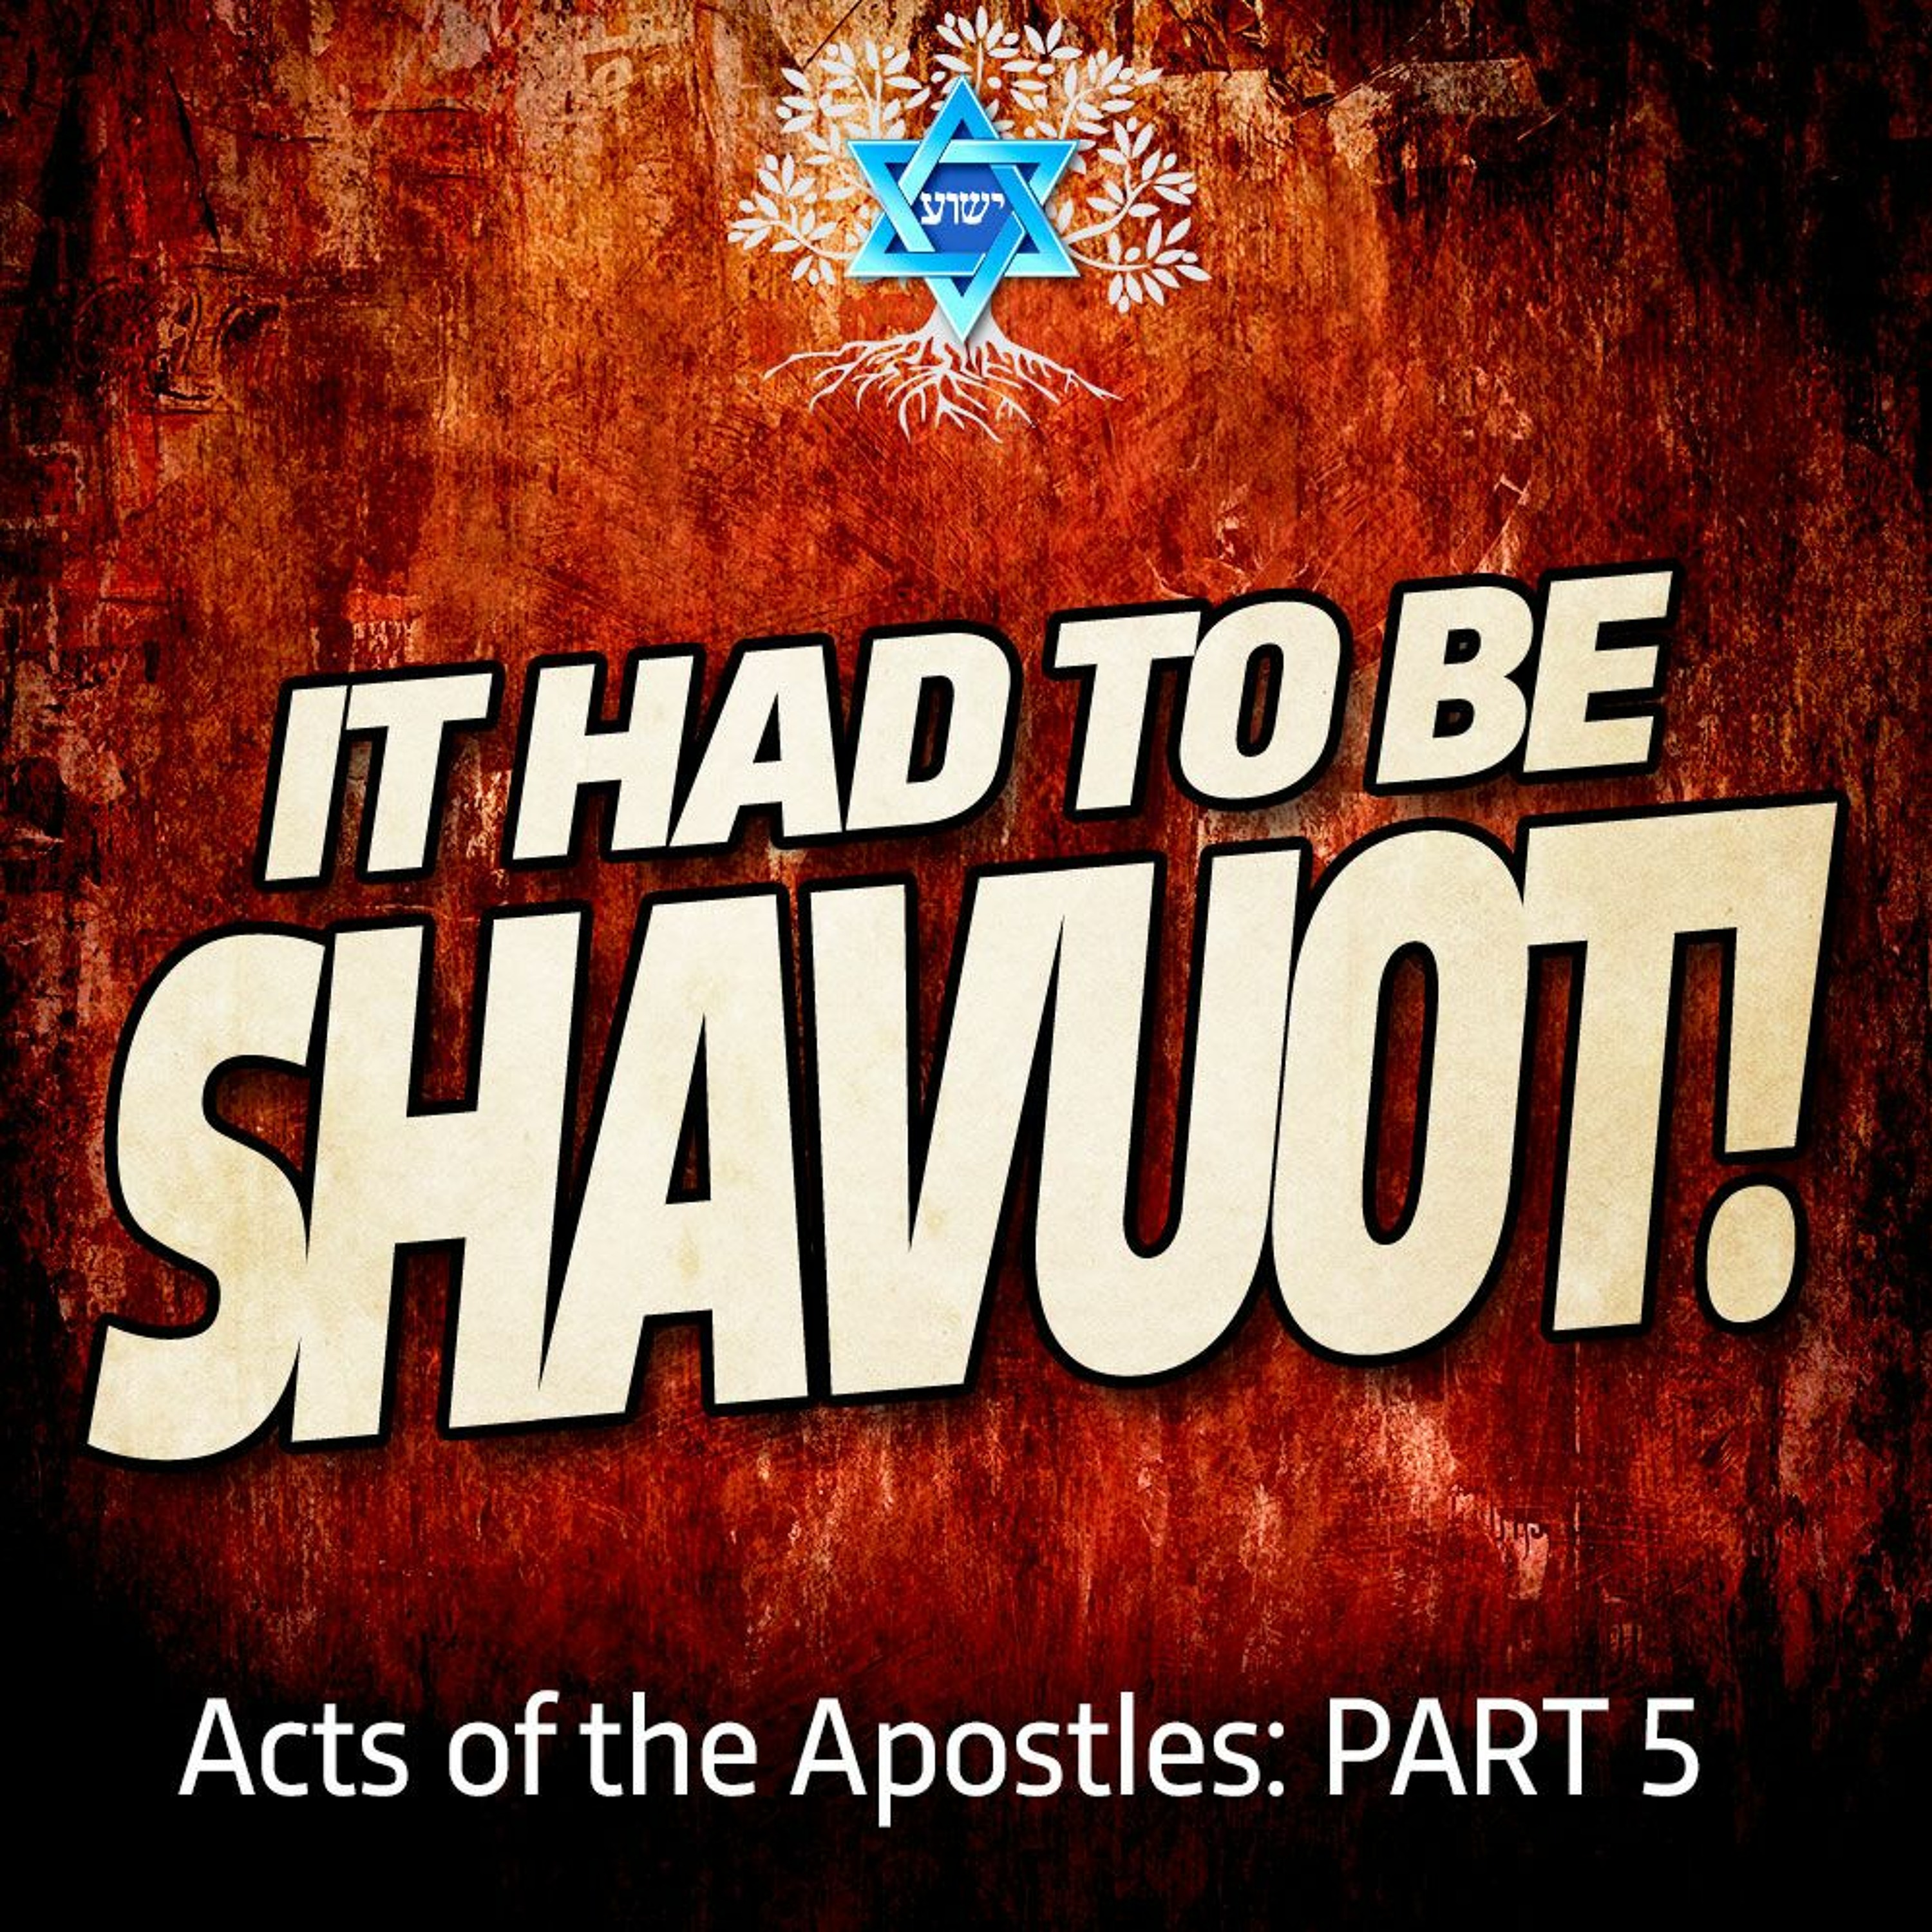 Acts Of The Apostles- Part 5 - Acts 2- It Had To Be Shavuot!